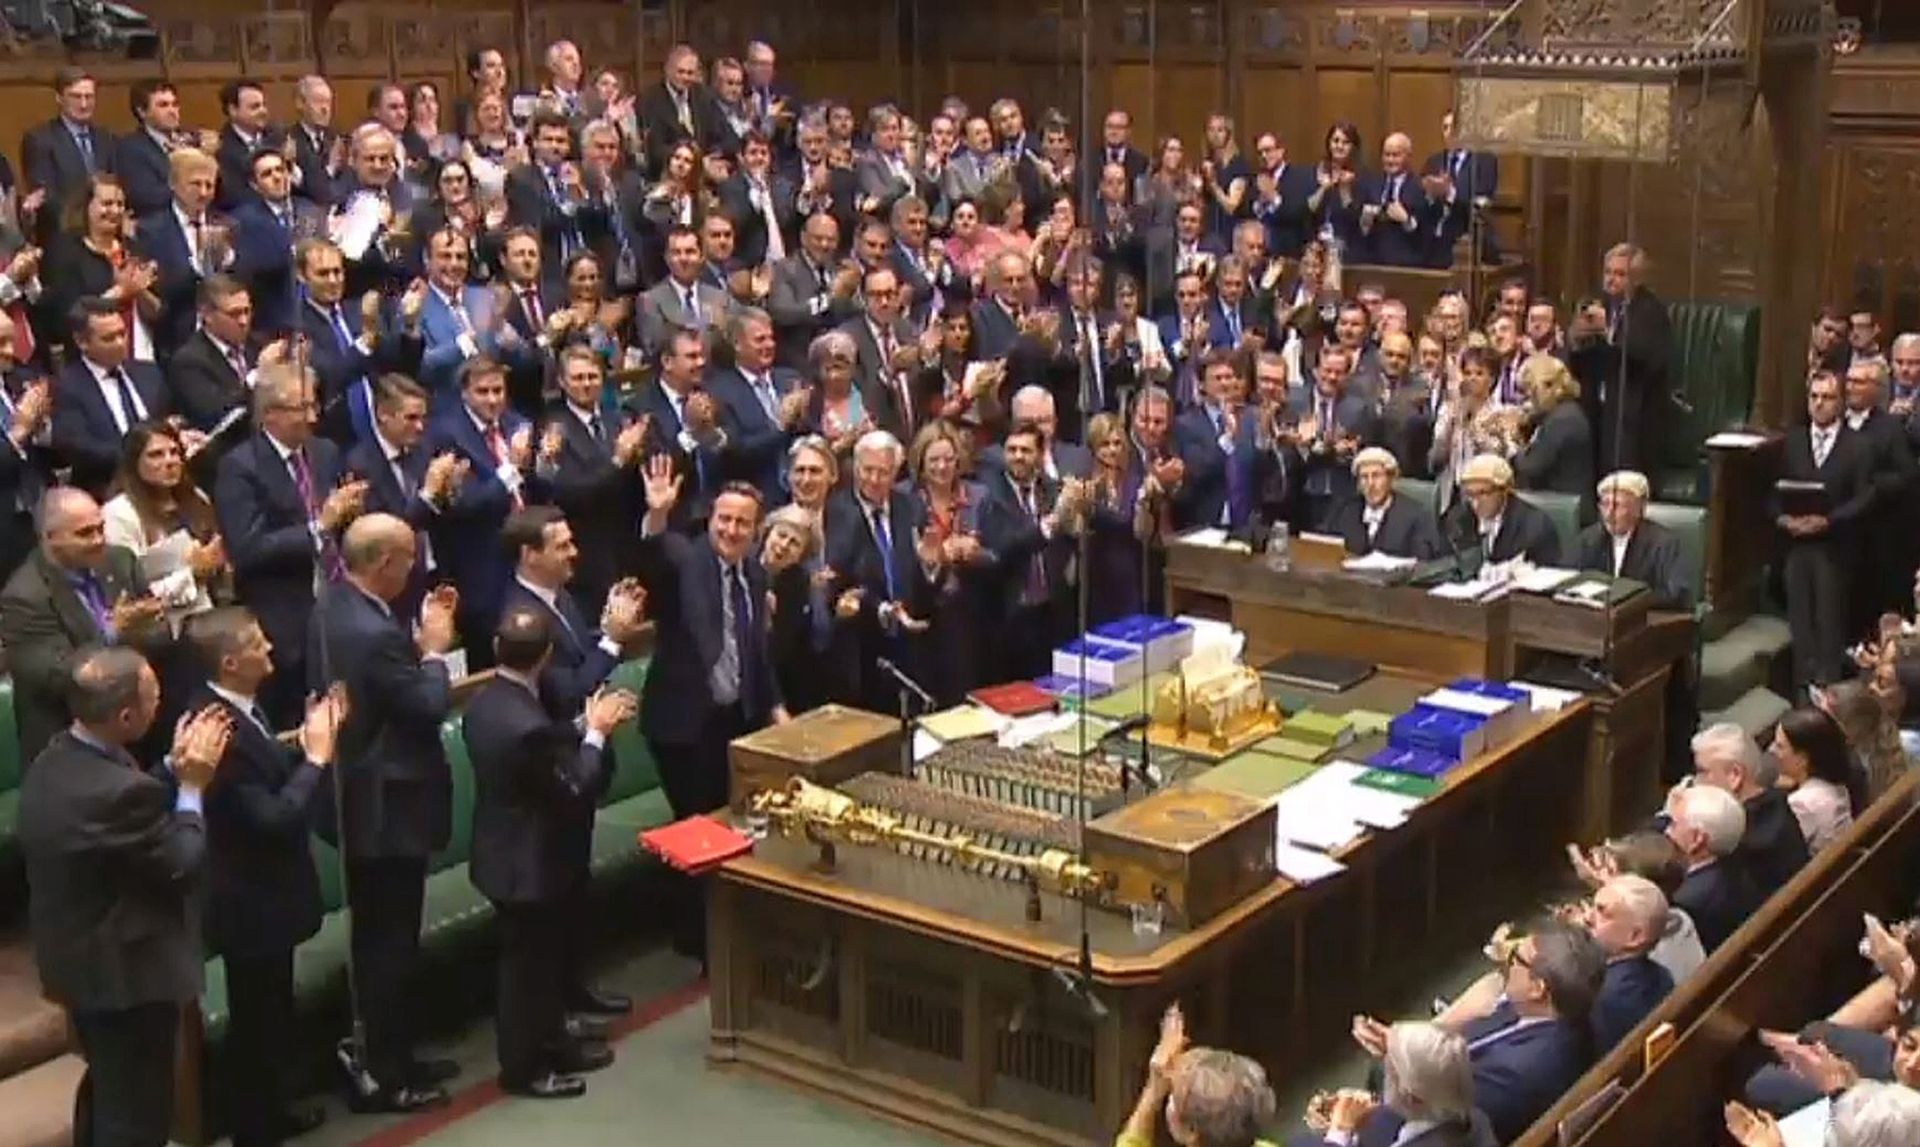 epa05423024 A British Parliament handout photo released on 13 July 2016 shows Conservative Members of Parliament giving outgoing Prime Minister David Cameron (C-L, waving) a standing ovation after finishing his last Prime Minister's Questions in the House of Commons, in London, Britain, 13 July 2016. Later in the day current Home Secretary Theresa May will succeed Cameron as Prime Minister after a meeting with the Queen.  EPA/PARLIAMENT/HANDOUT UK AND IRELAND OUT * BEST QUALITY AVAILABLE HANDOUT EDITORIAL USE ONLY/NO SALES/NO ARCHIVES